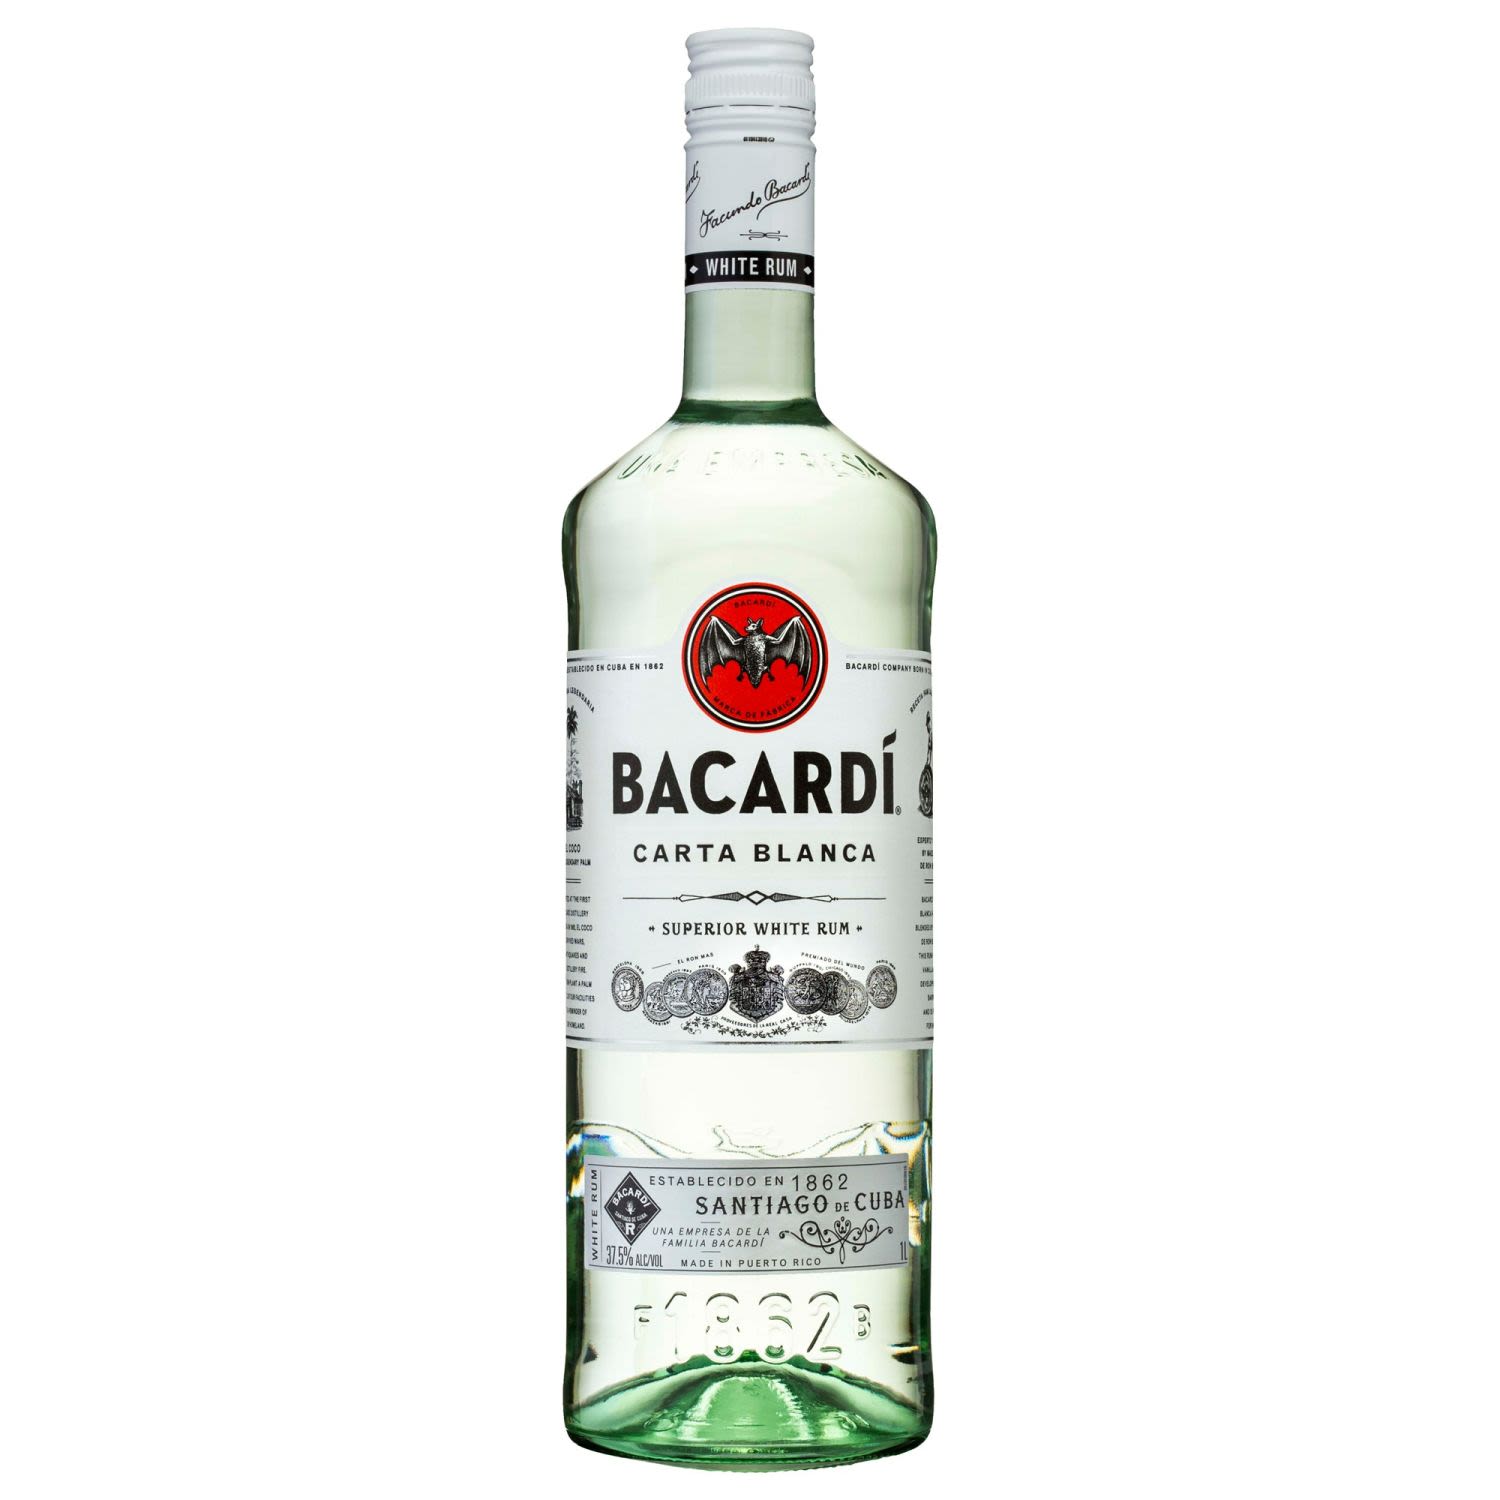 The most famous white Rum in the world, Bacardi is sold in over 100 countries and used in countless cocktails. A light and clean spirit, Bacardi is filtered through charcoal for purity and aged in white oak for character.<br /> <br />Alcohol Volume: 37.50%<br /><br />Pack Format: Bottle<br /><br />Standard Drinks: 30</br /><br />Pack Type: Bottle<br /><br />Country of Origin: Puerto Rico<br />